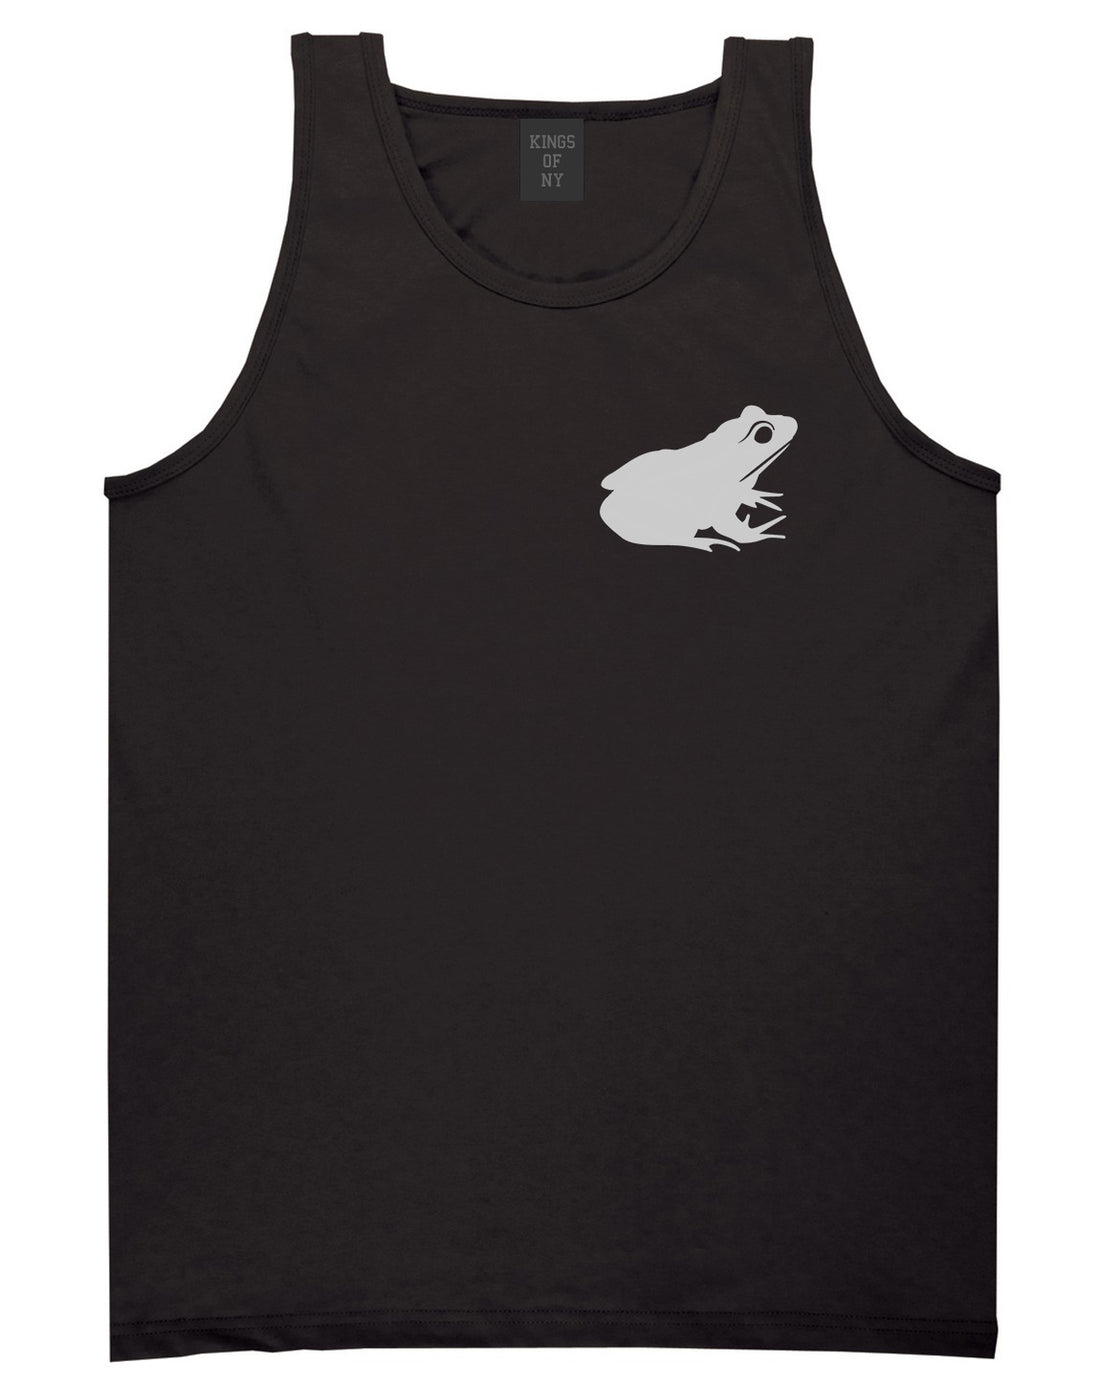 Frog Animal Chest Mens Black Tank Top Shirt by KINGS OF NY